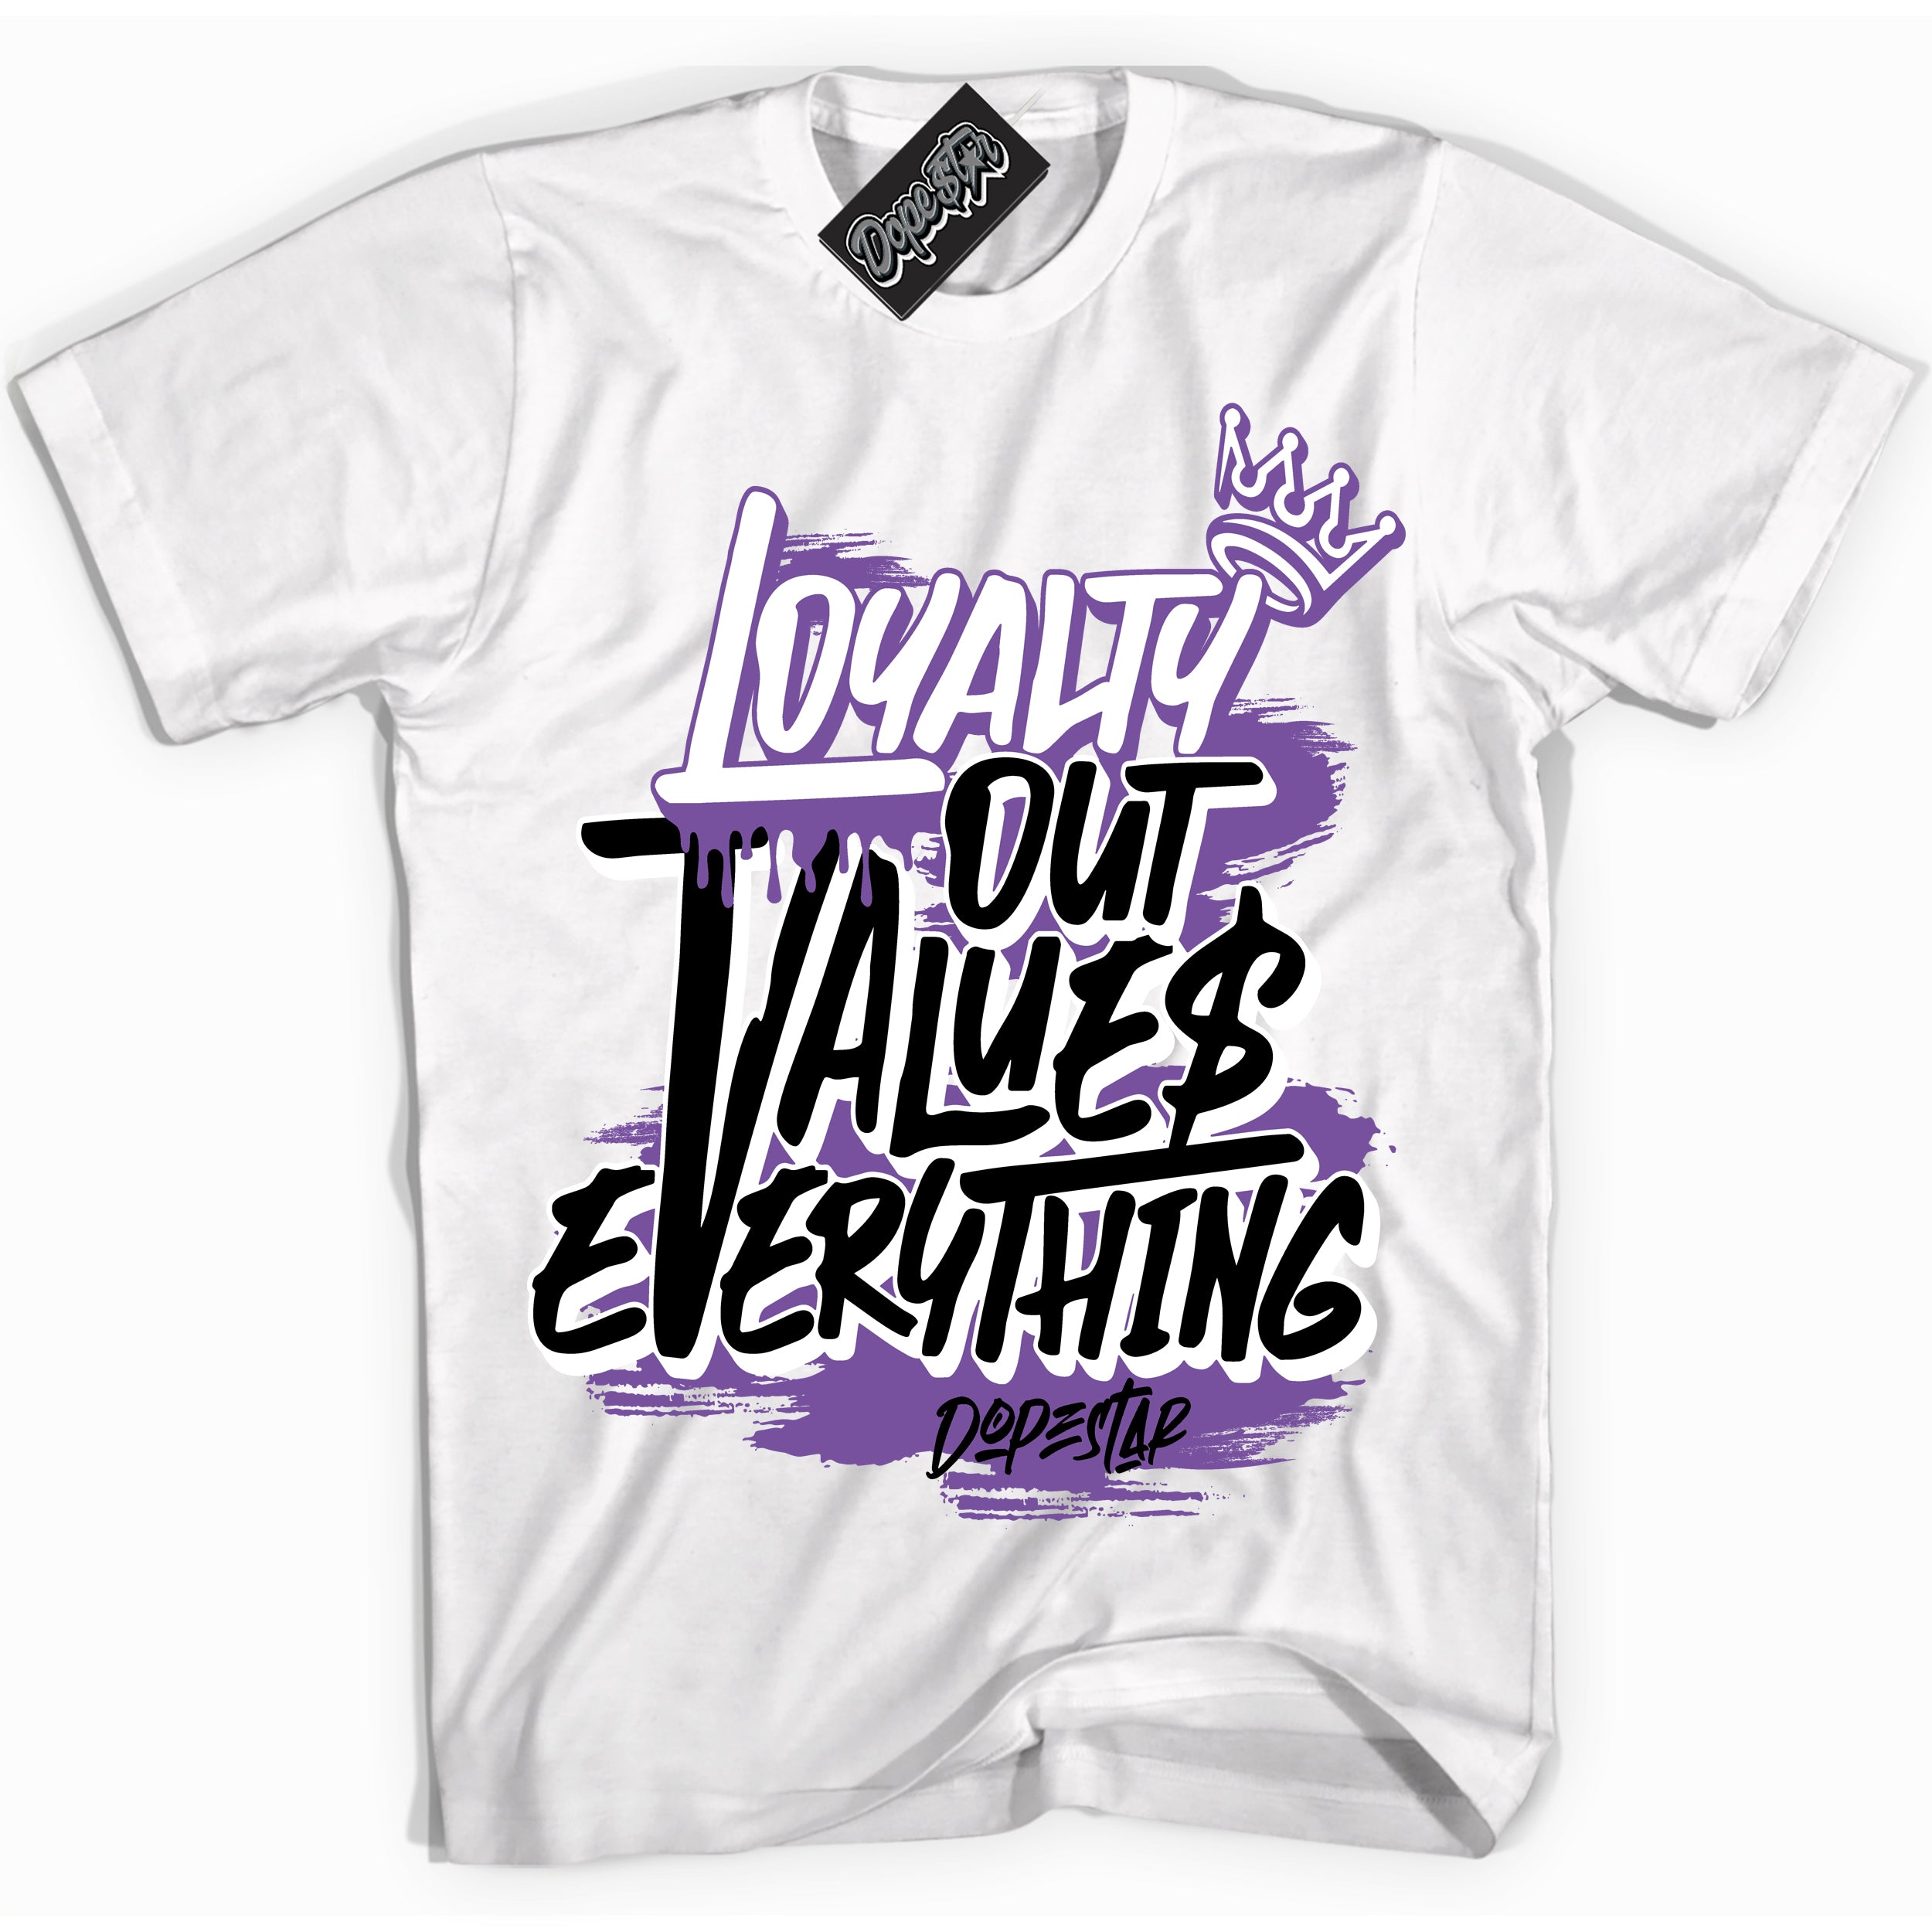 Cool White Shirt with “ Loyalty Out Values Everything” design that perfectly matches FlyEase Black Bright Violet 1s Sneakers.